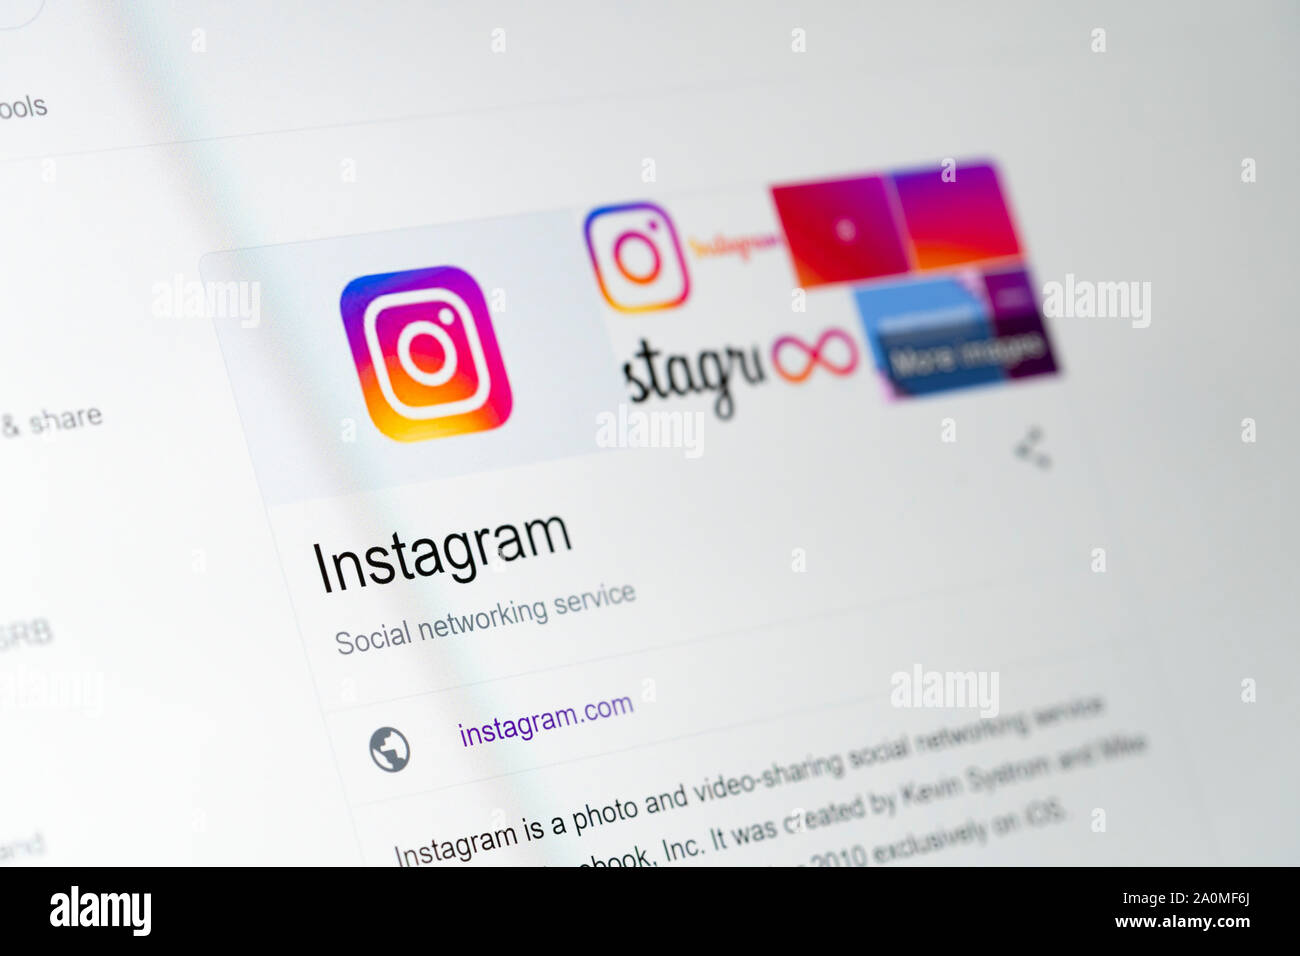 A closeup view of a computer screen web page showing the Instagram from Facebook home page Stock Photo